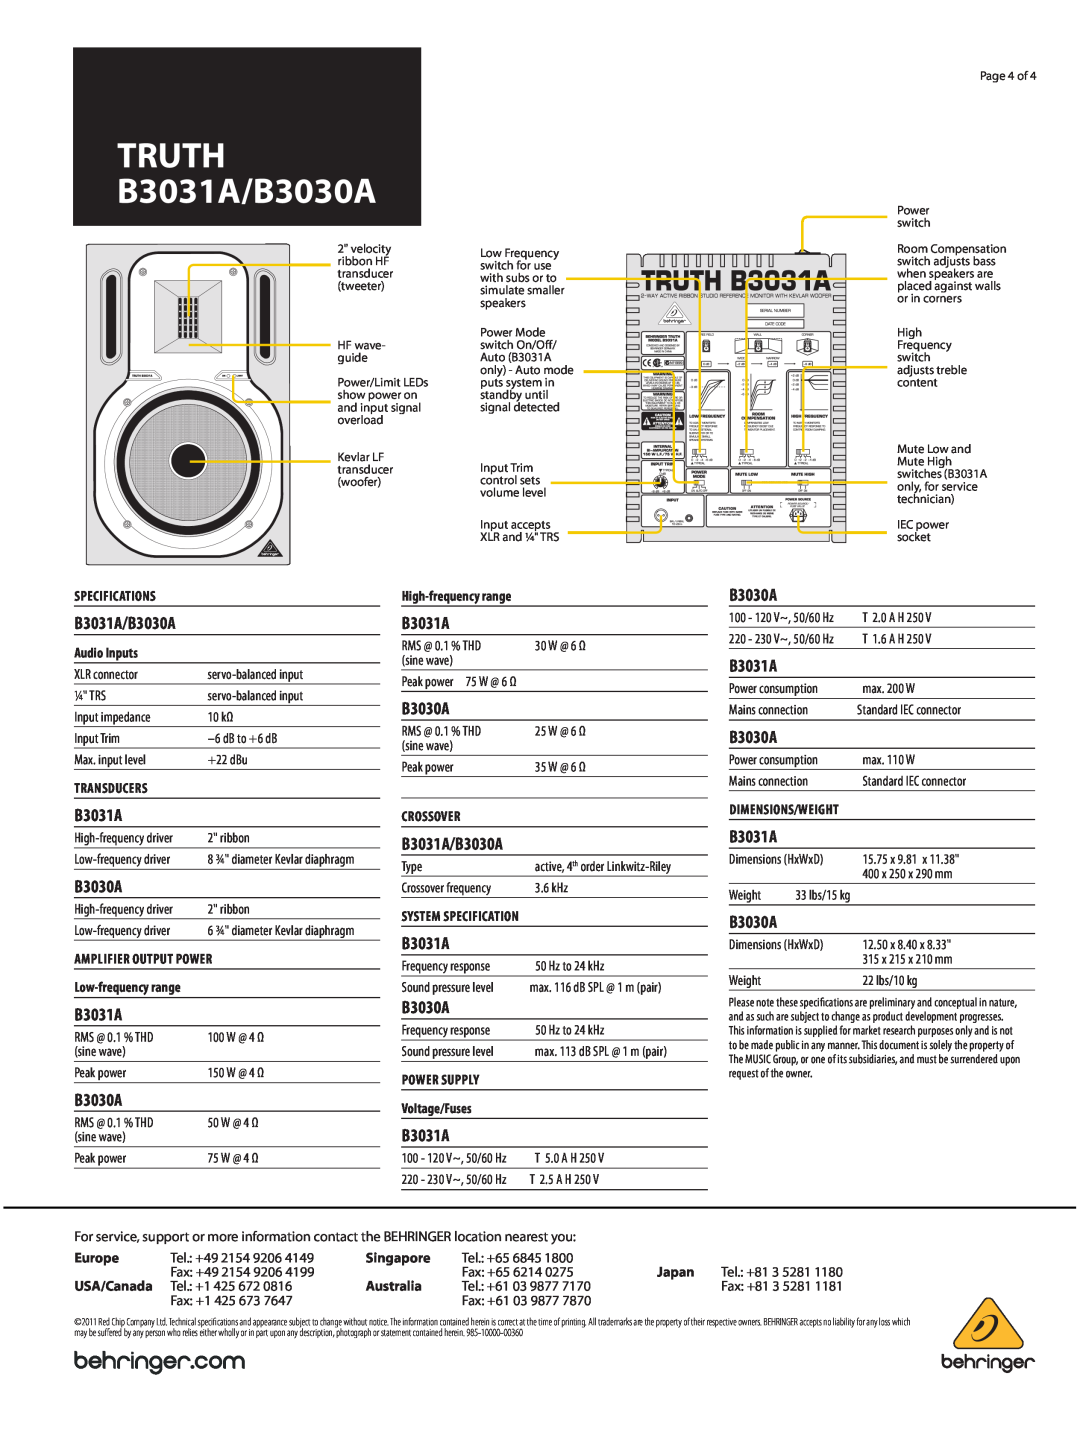 Behringer truth B3031A manual TRUTH B3031A/B3030A, Specifications 